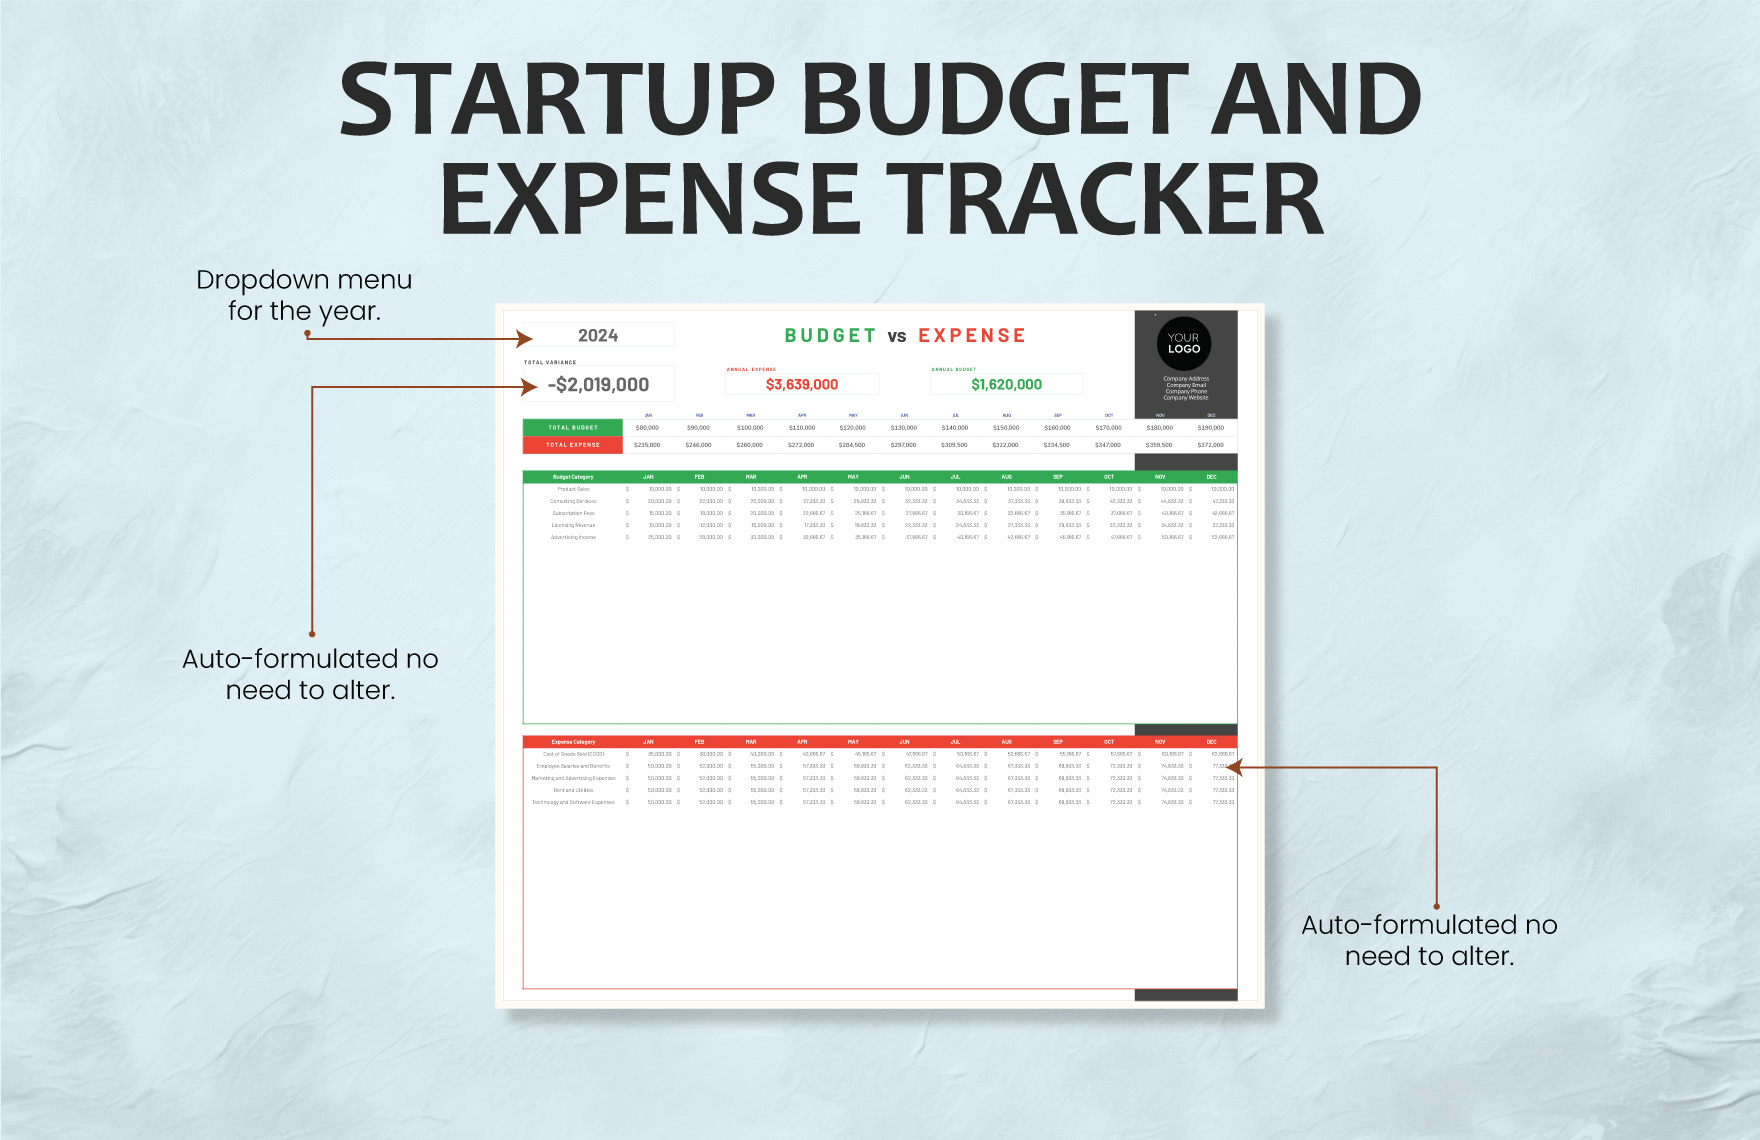 Startup Budget and Expense Tracker Template